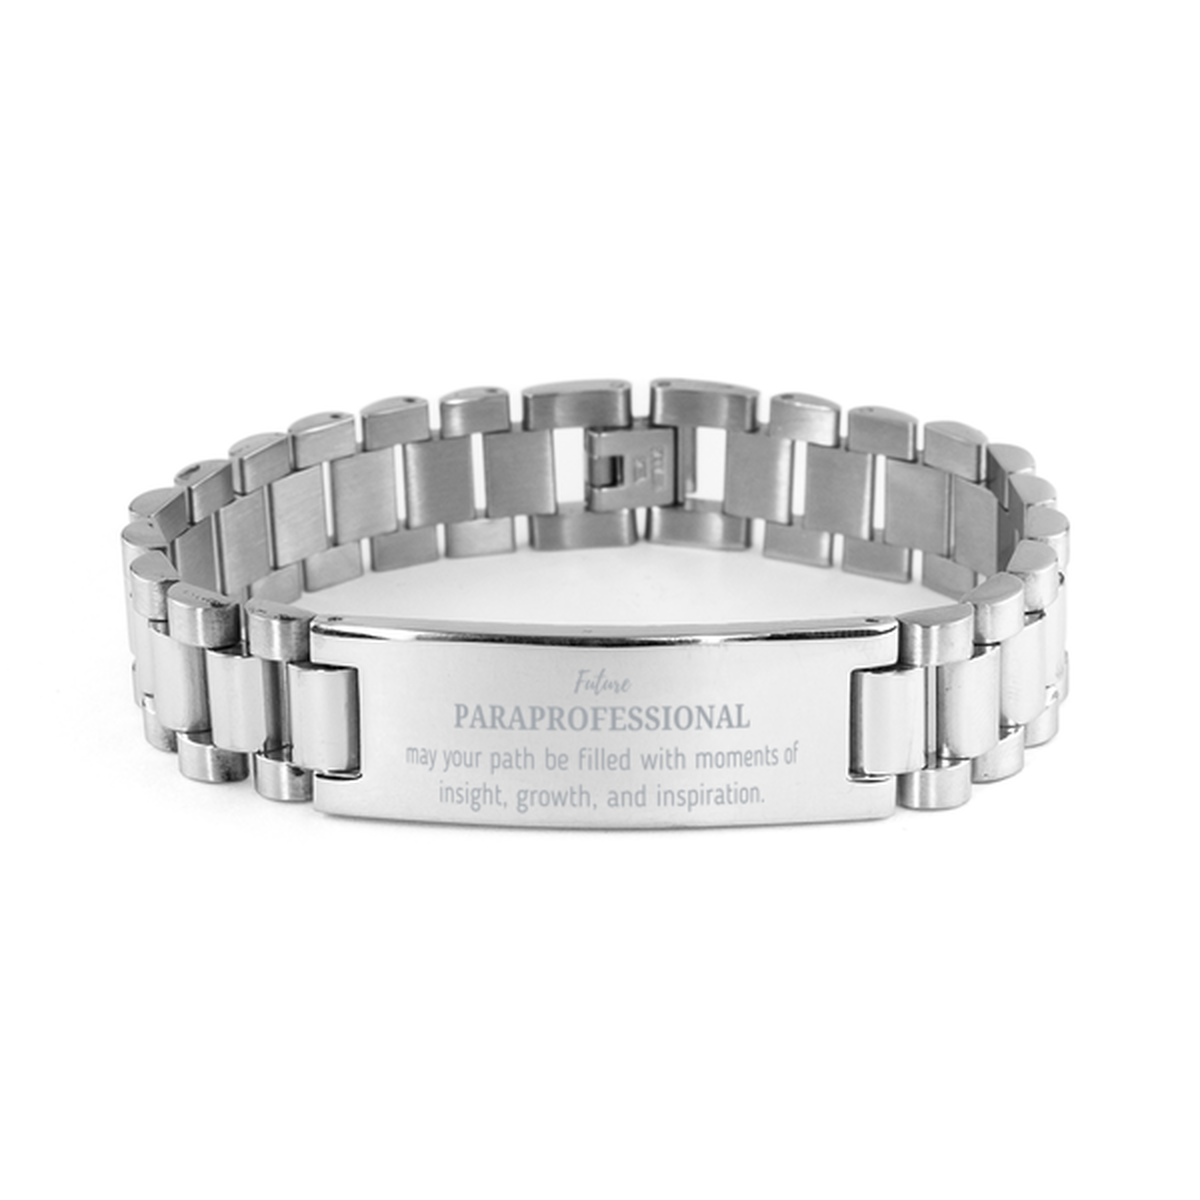 Future Paraprofessional Gifts, May your path be filled with moments of insight, Graduation Gifts for New Paraprofessional, Christmas Unique Ladder Stainless Steel Bracelet For Men, Women, Friends